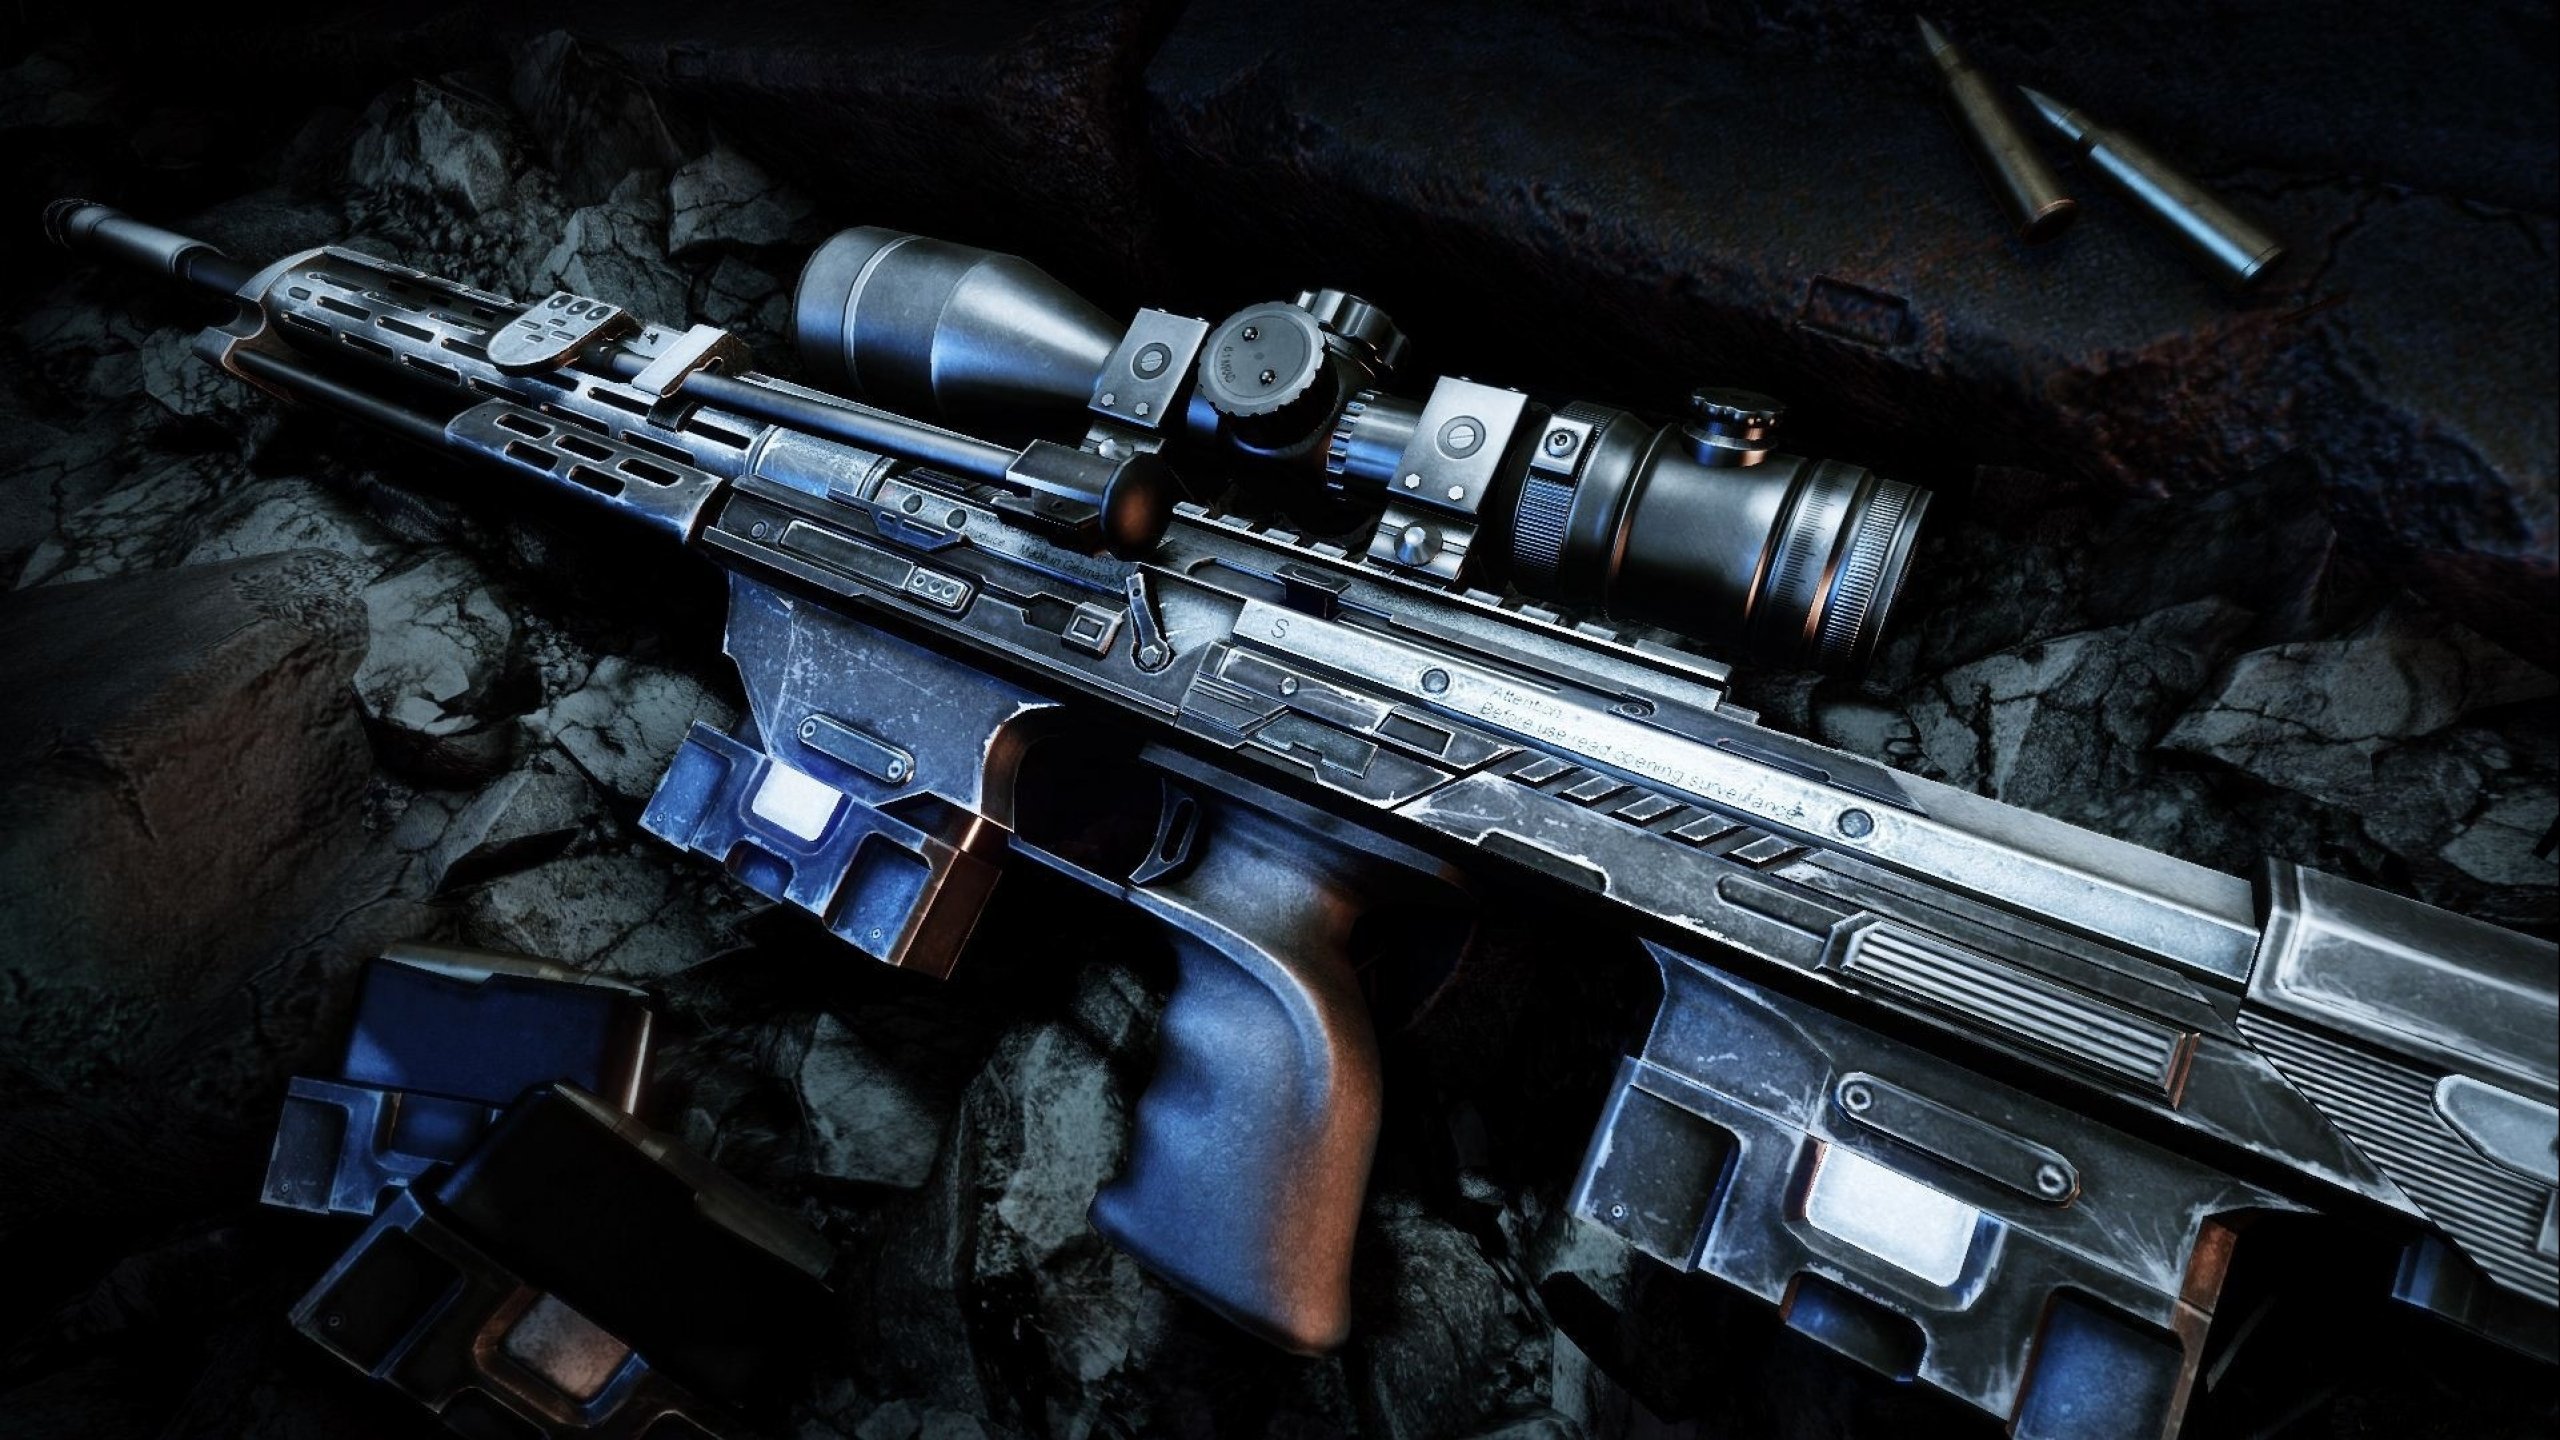 sniper, Ghost, Warrior, Tactical, Shooter, Stealth, Military, Action, 1sgw, Weapon, Gun Wallpaper